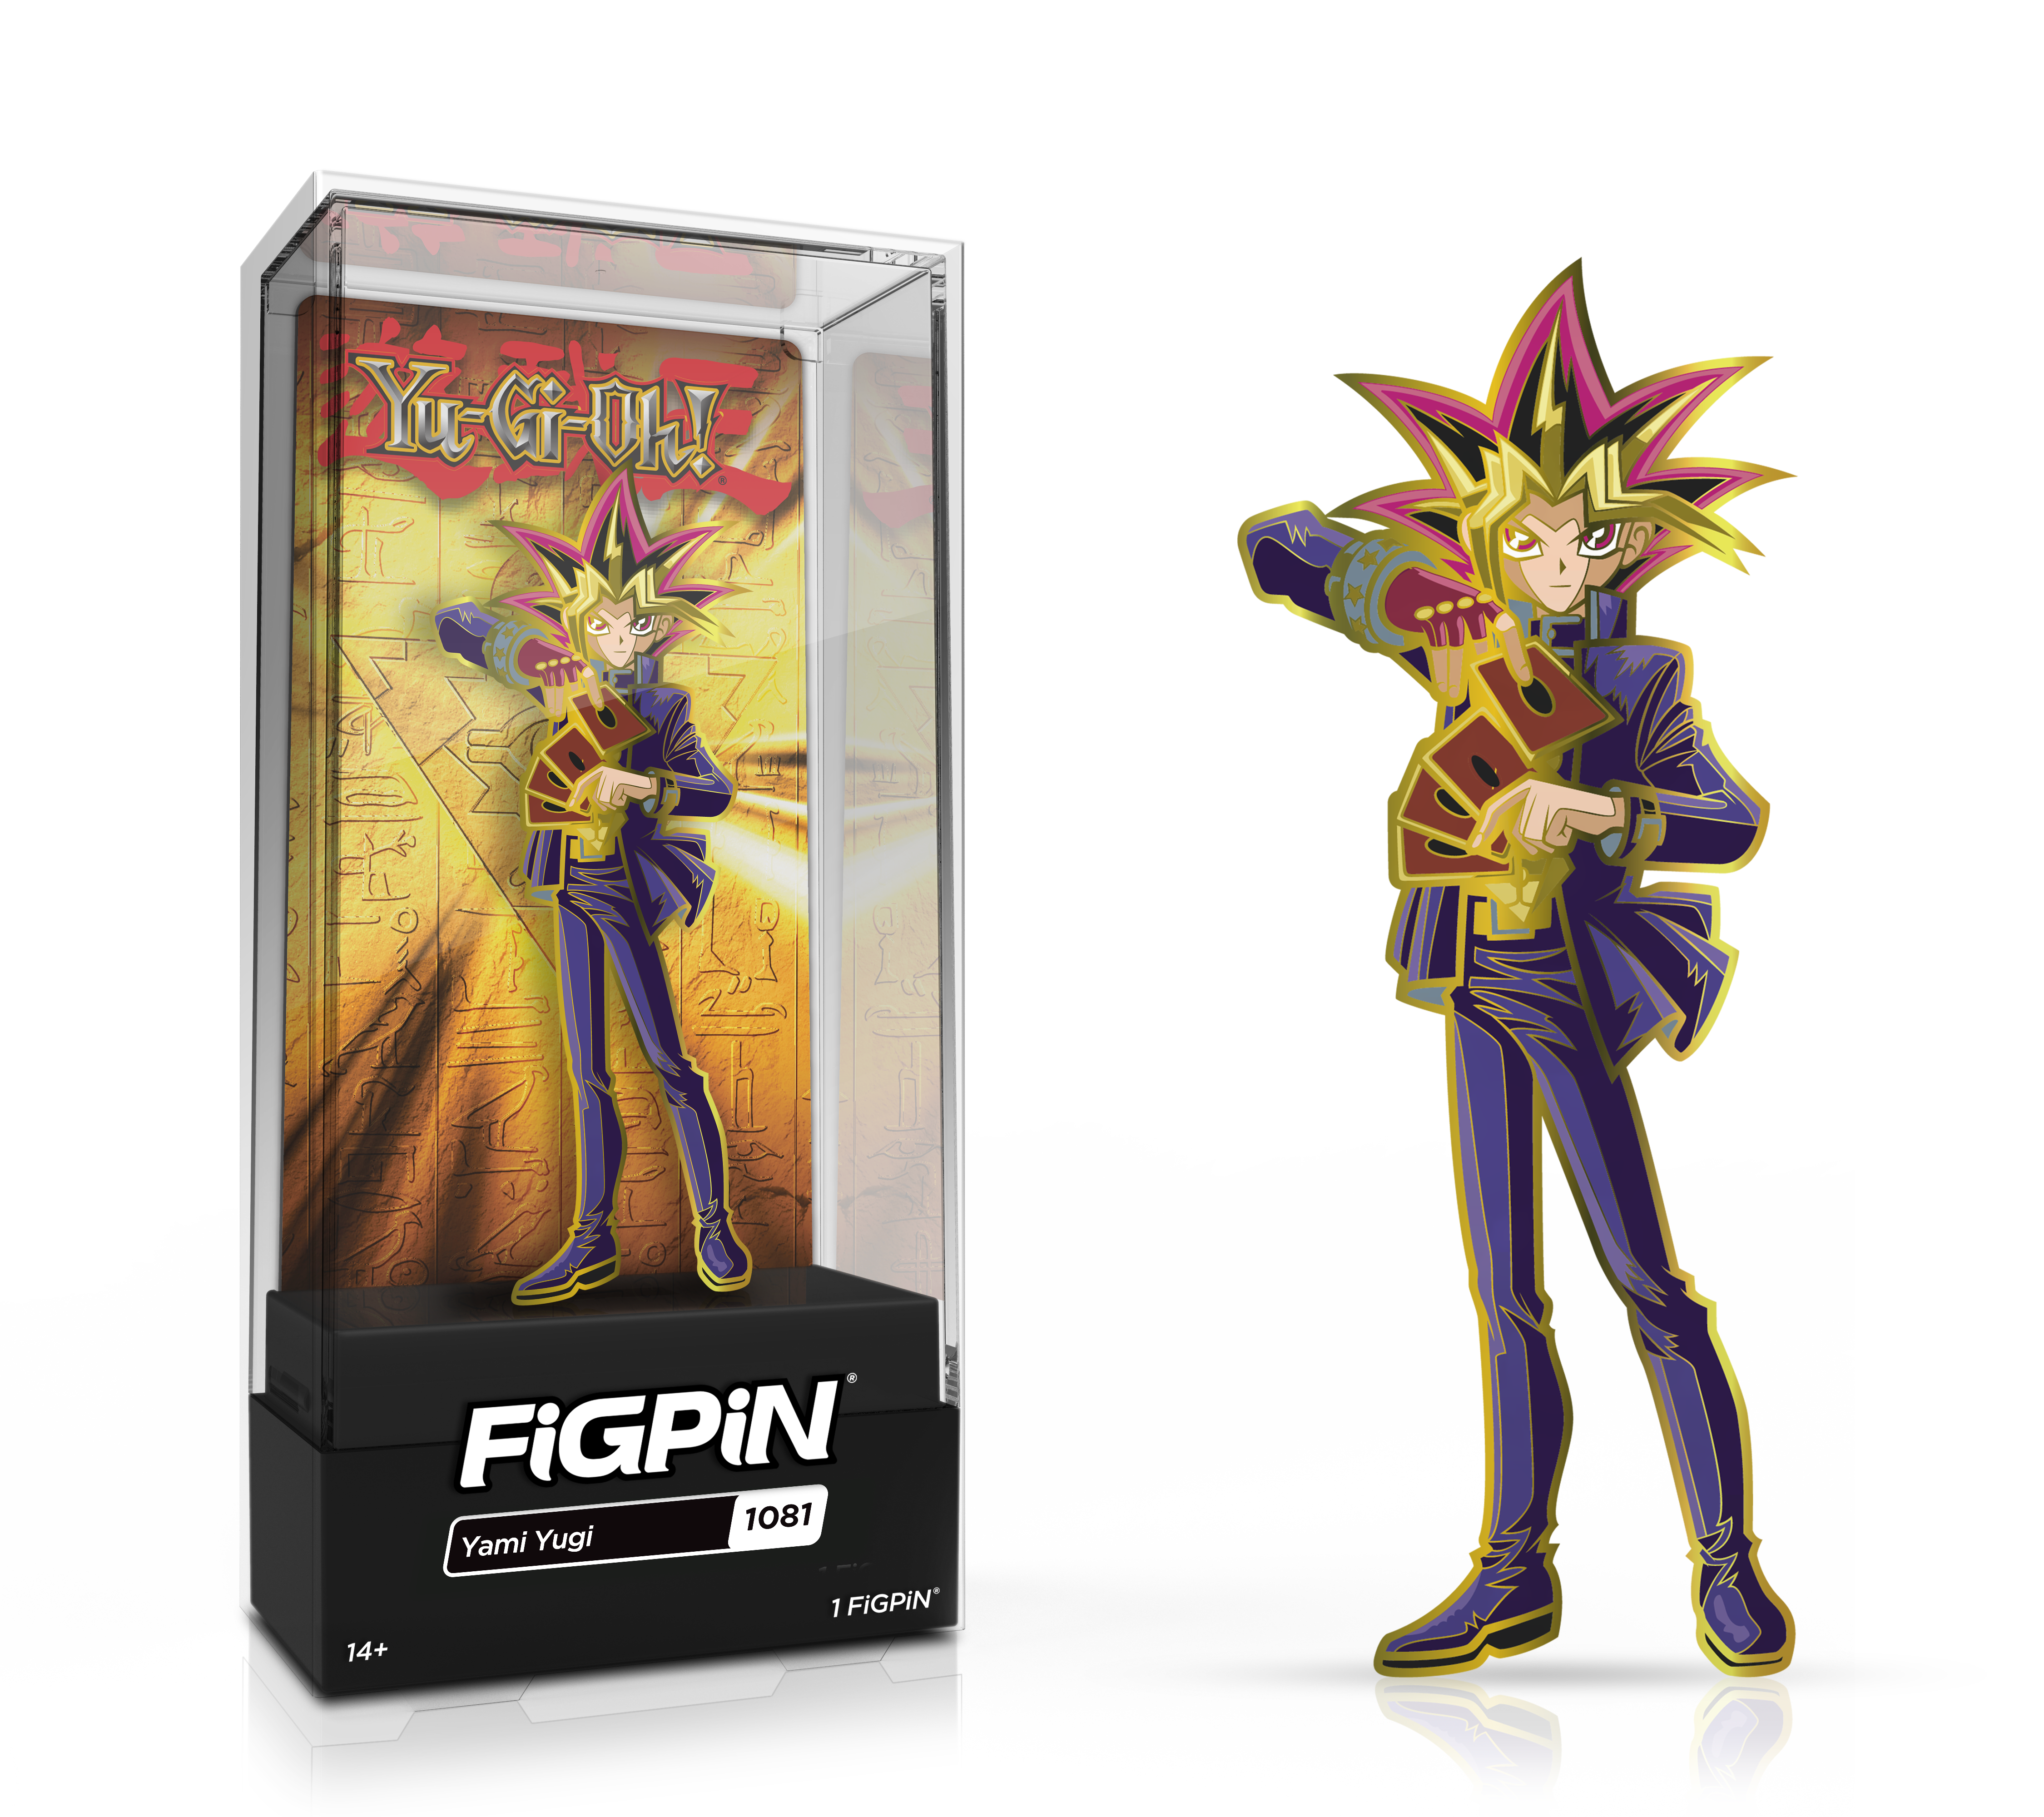 Side by side view of the gold plated Yami Yugi enamel pin in display case and the art render.